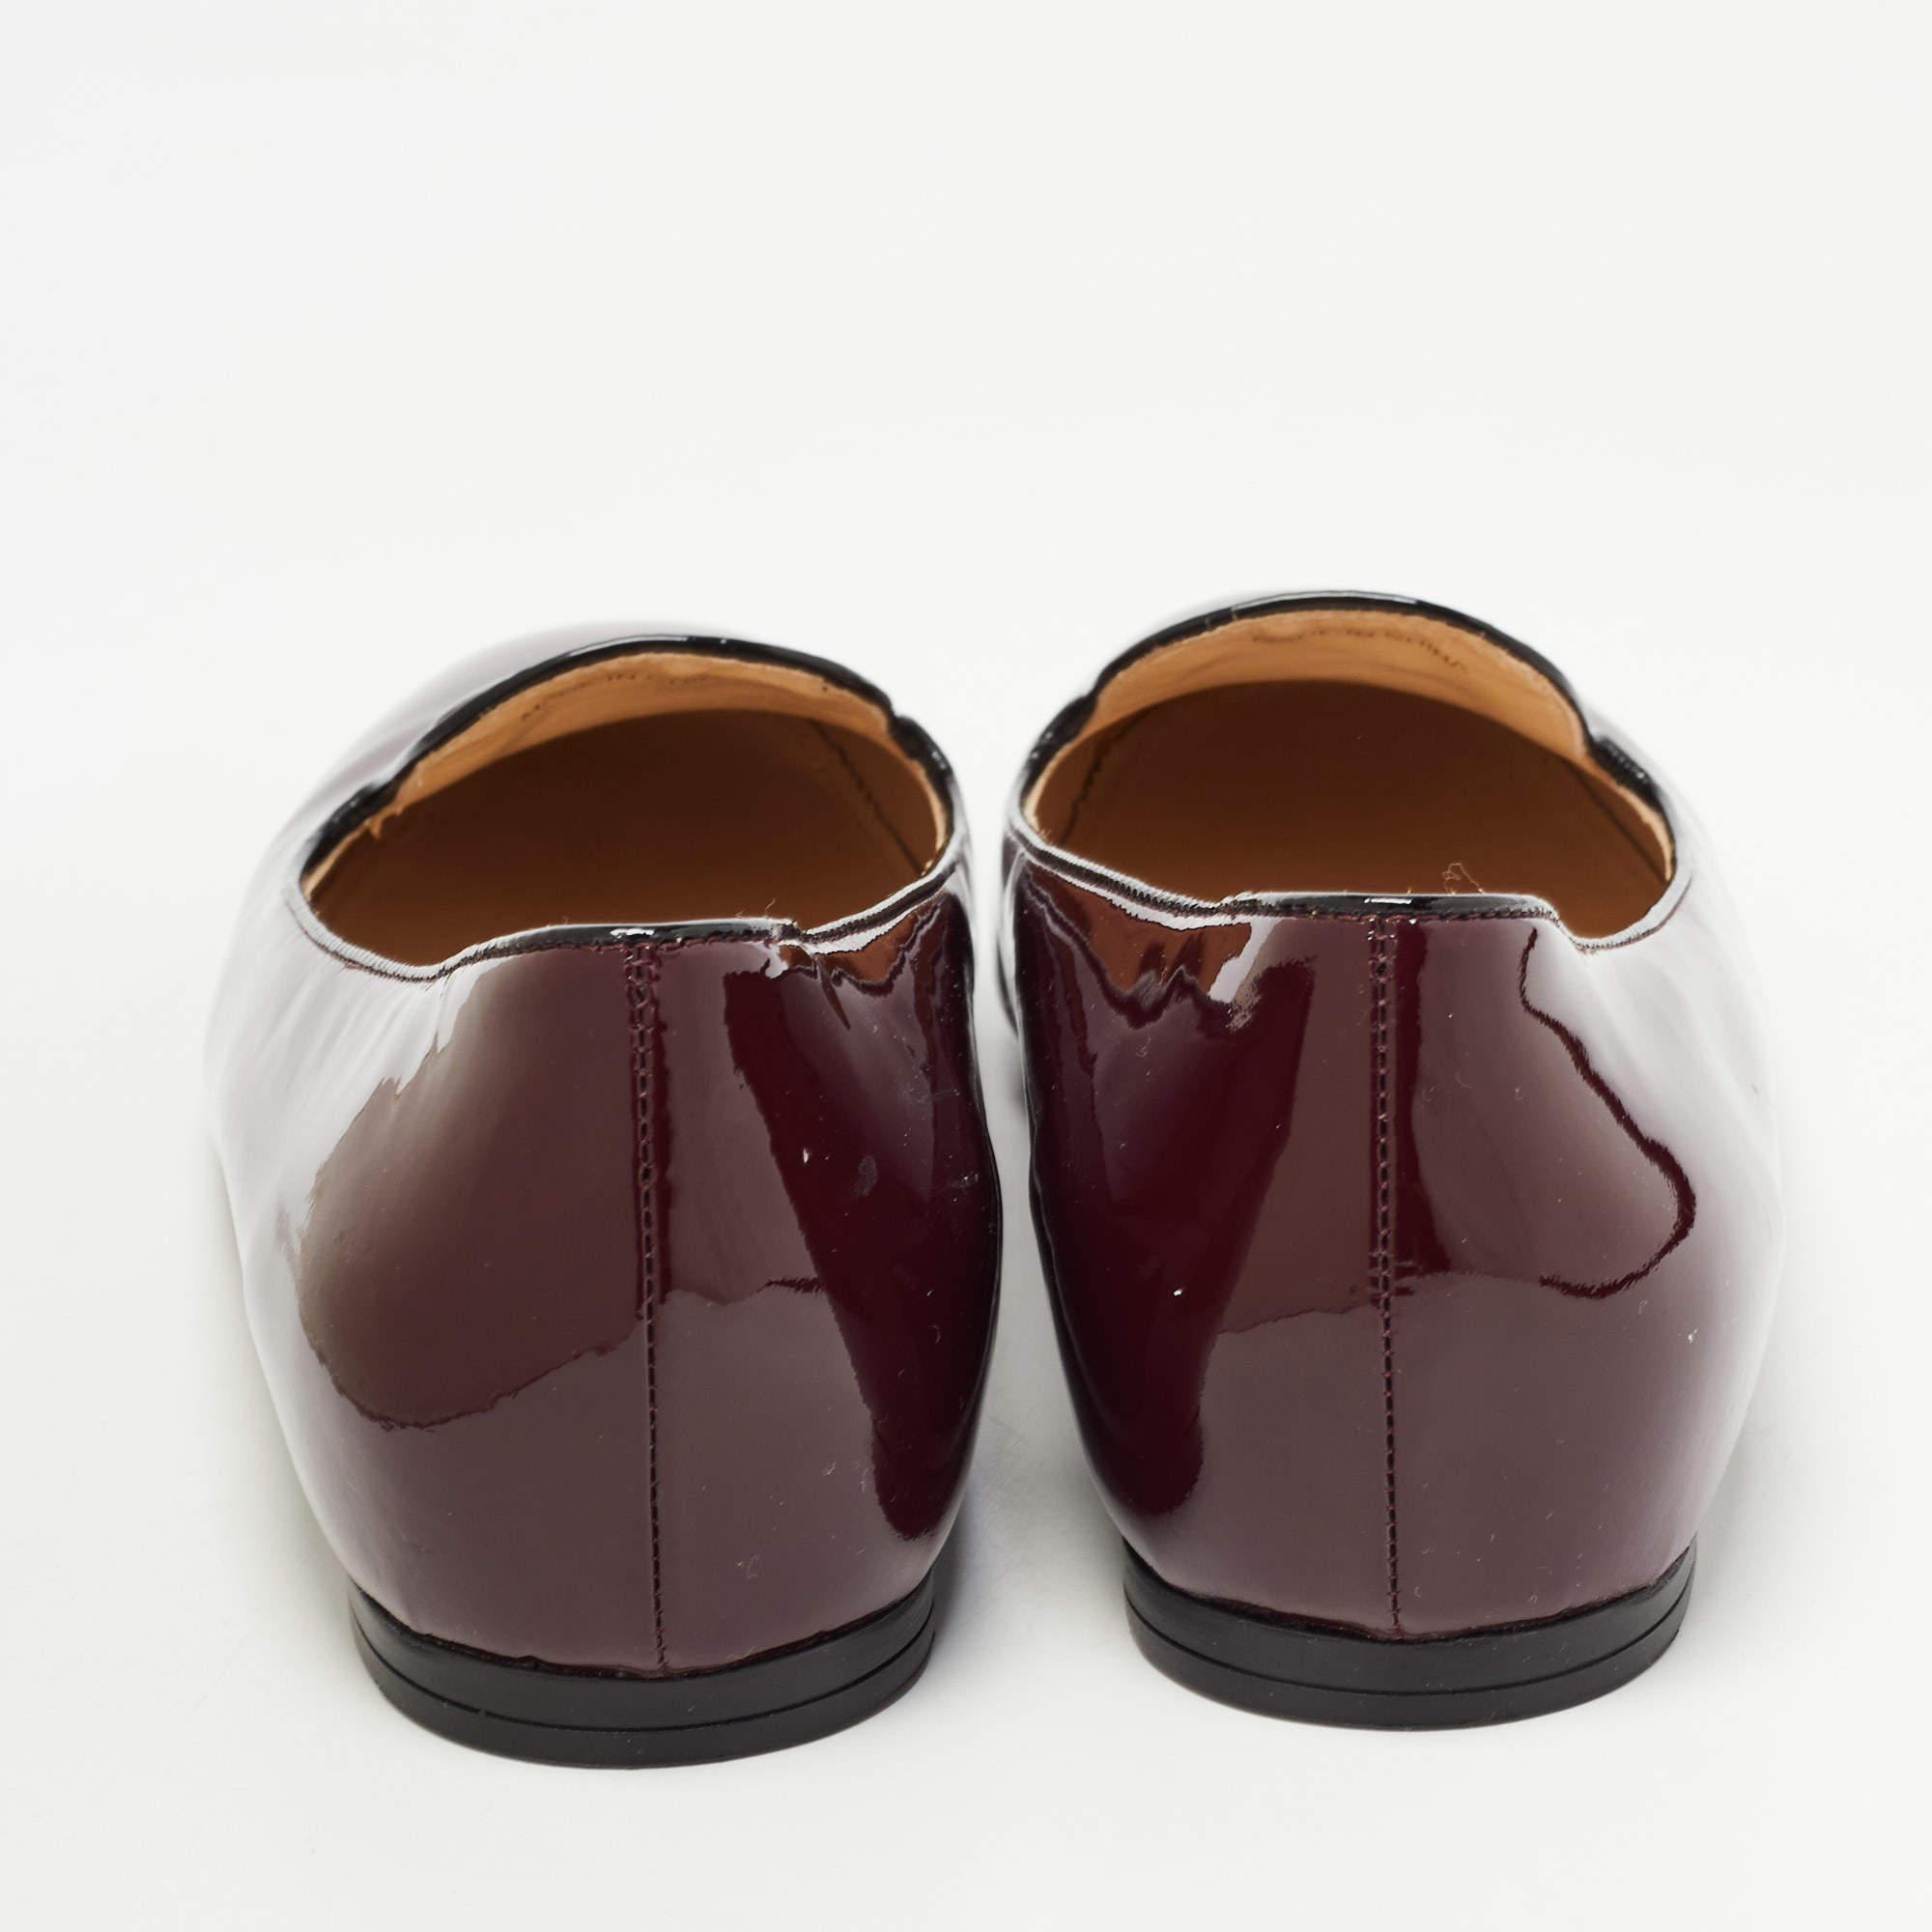 Coming from one of the most celebrated fashion house, these smoking slippers are known for their brilliant craftsmanship. A seamless mix of comfort and style, these smoking slippers will add a refined touch to your ensemble without too much